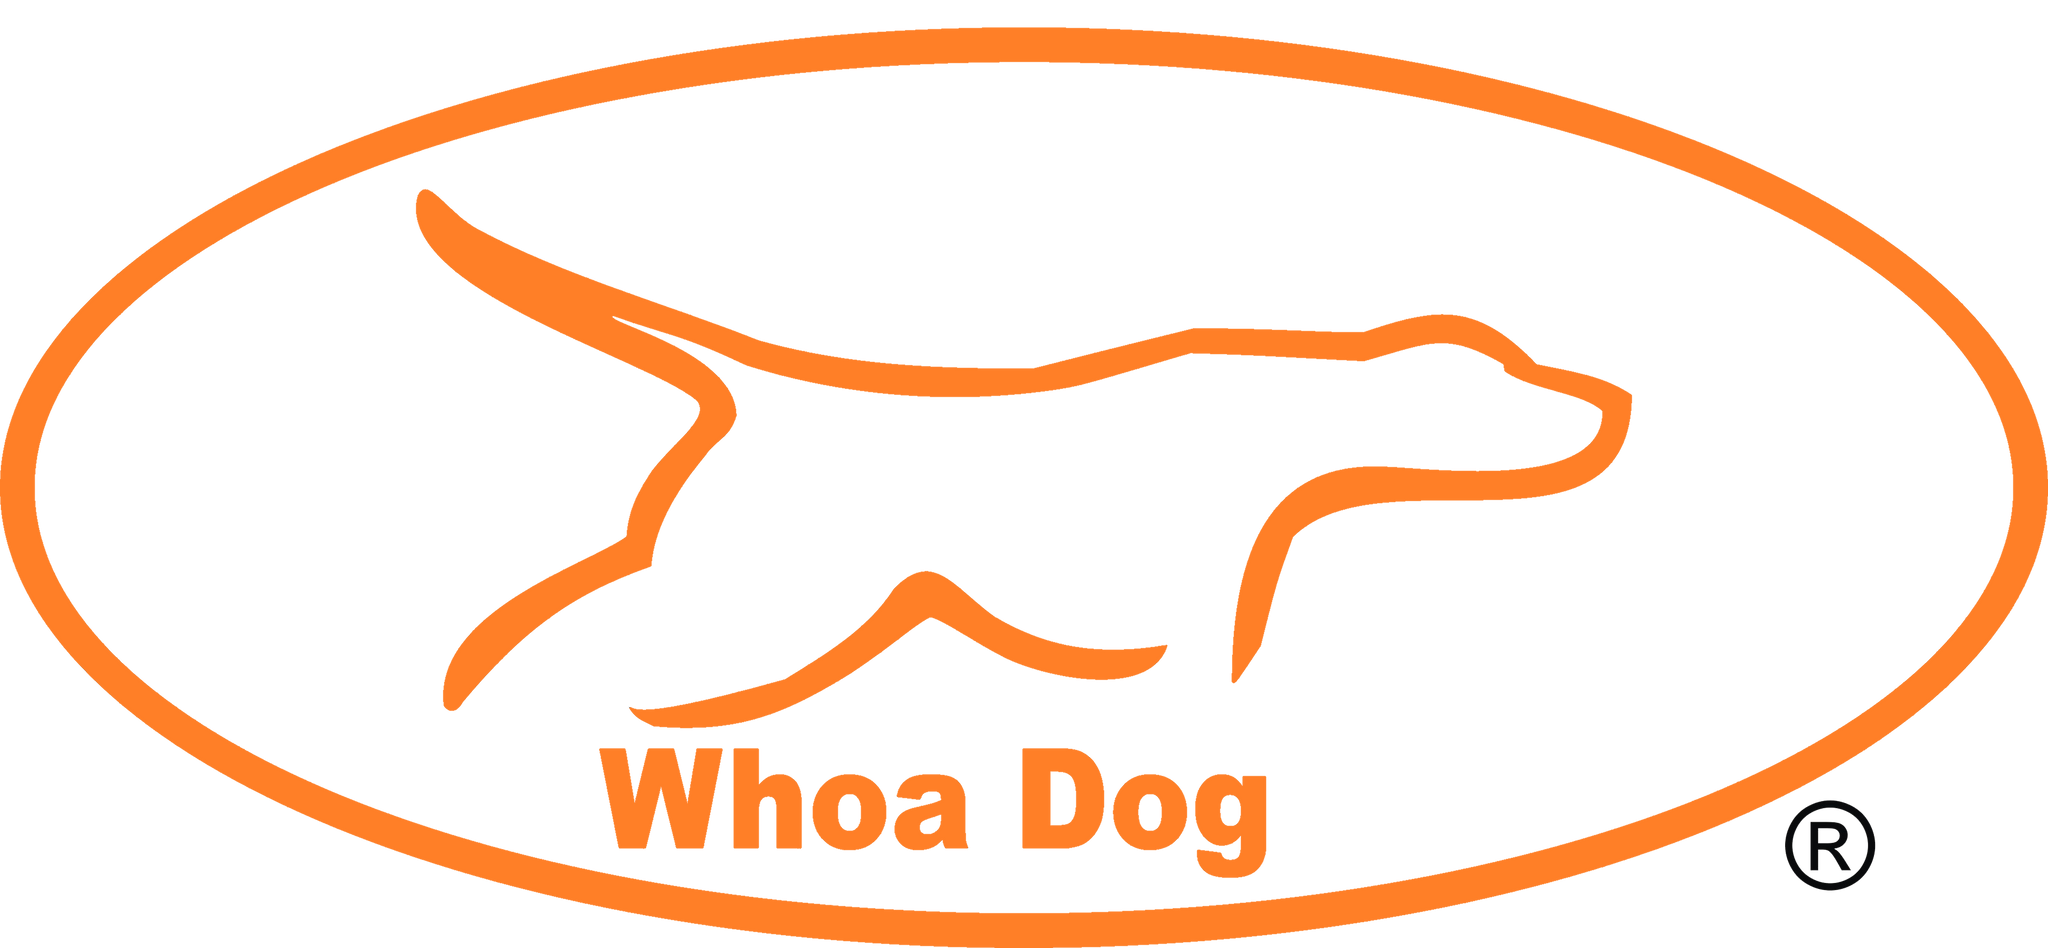 WhoaDog - Sportsdog Apparel and Accessories for Game Bird Enthusiasts